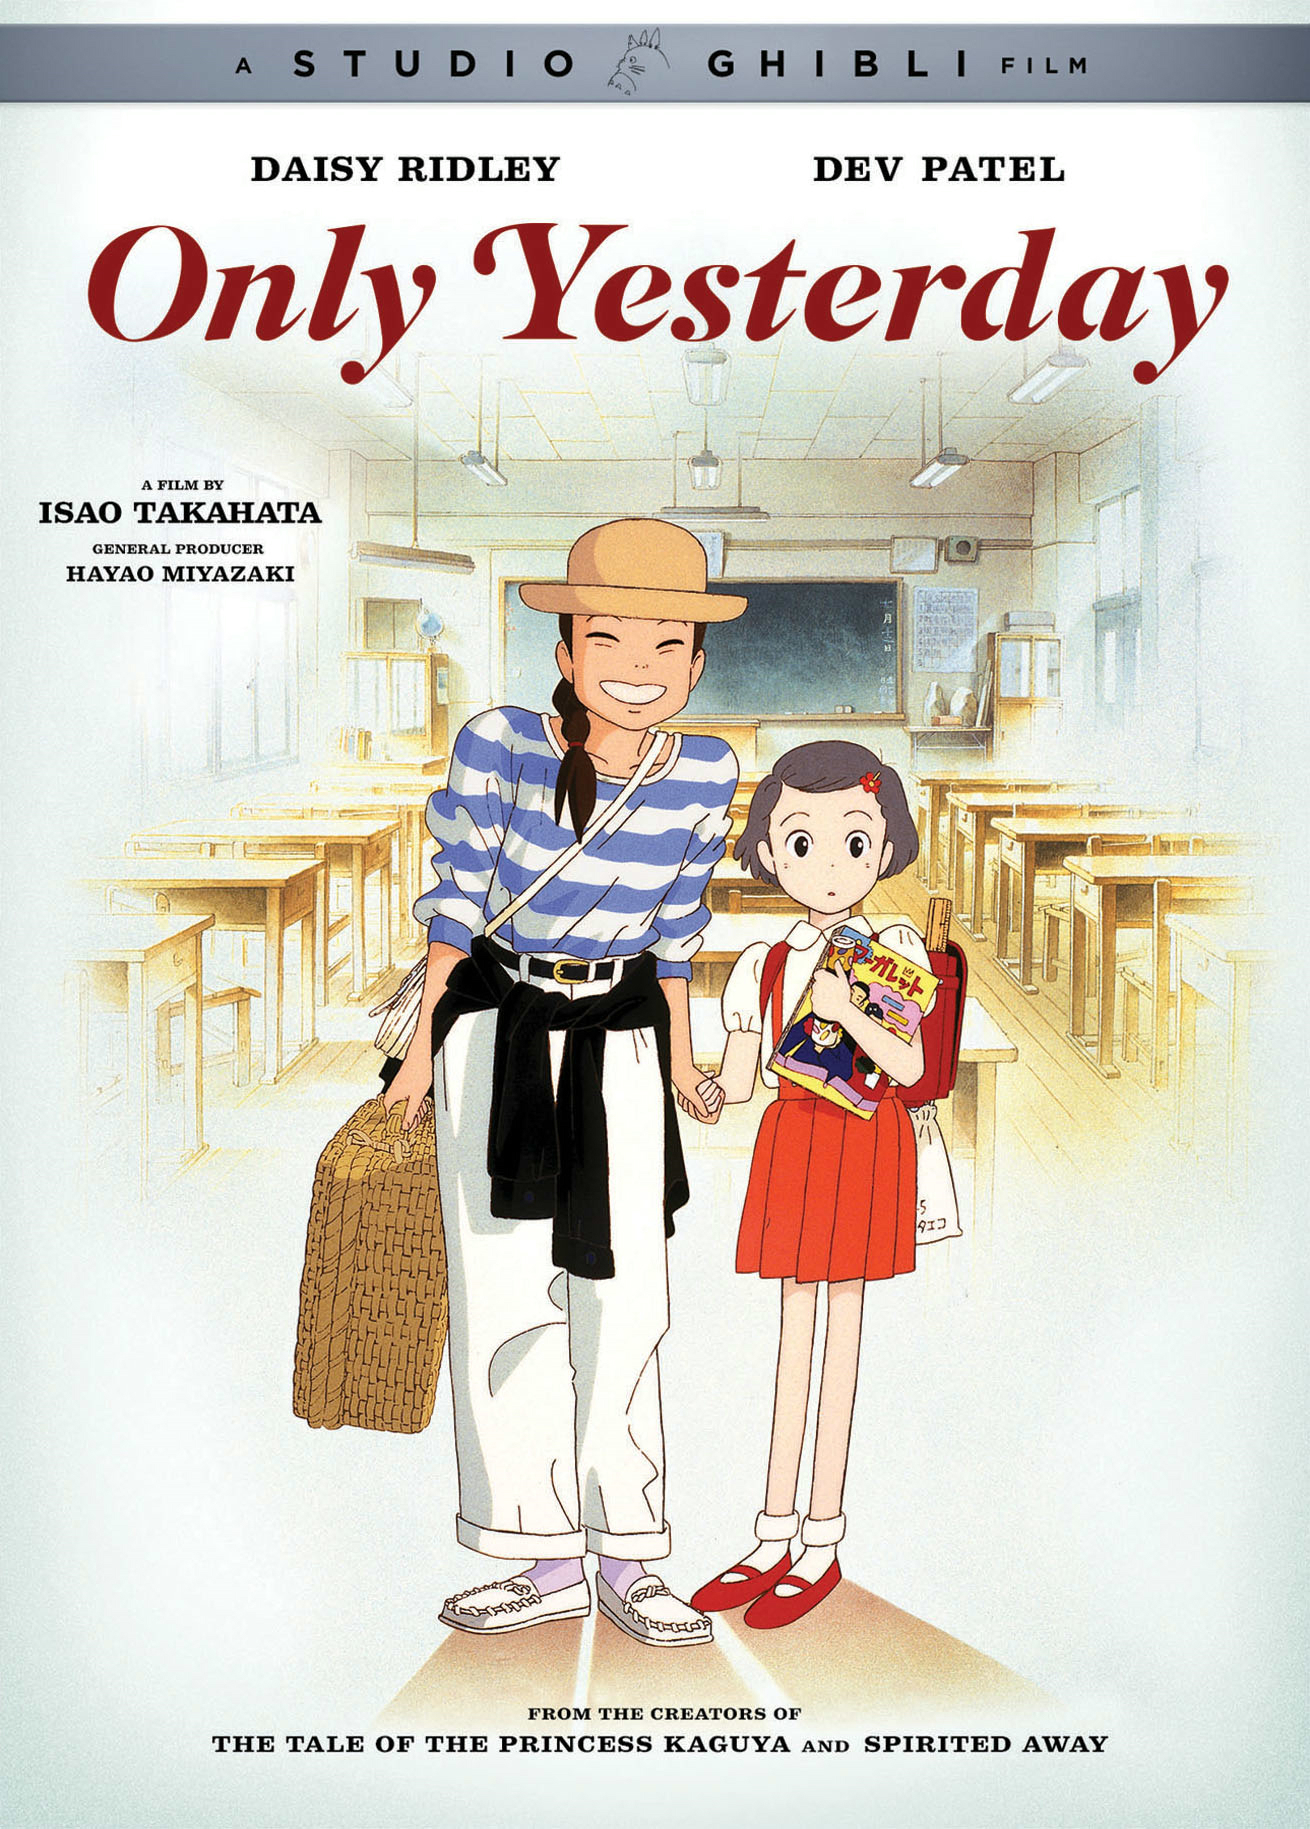 Only Yesterday - DVD [ 2016 ]  - Anime Movies On DVD - Movies On GRUV